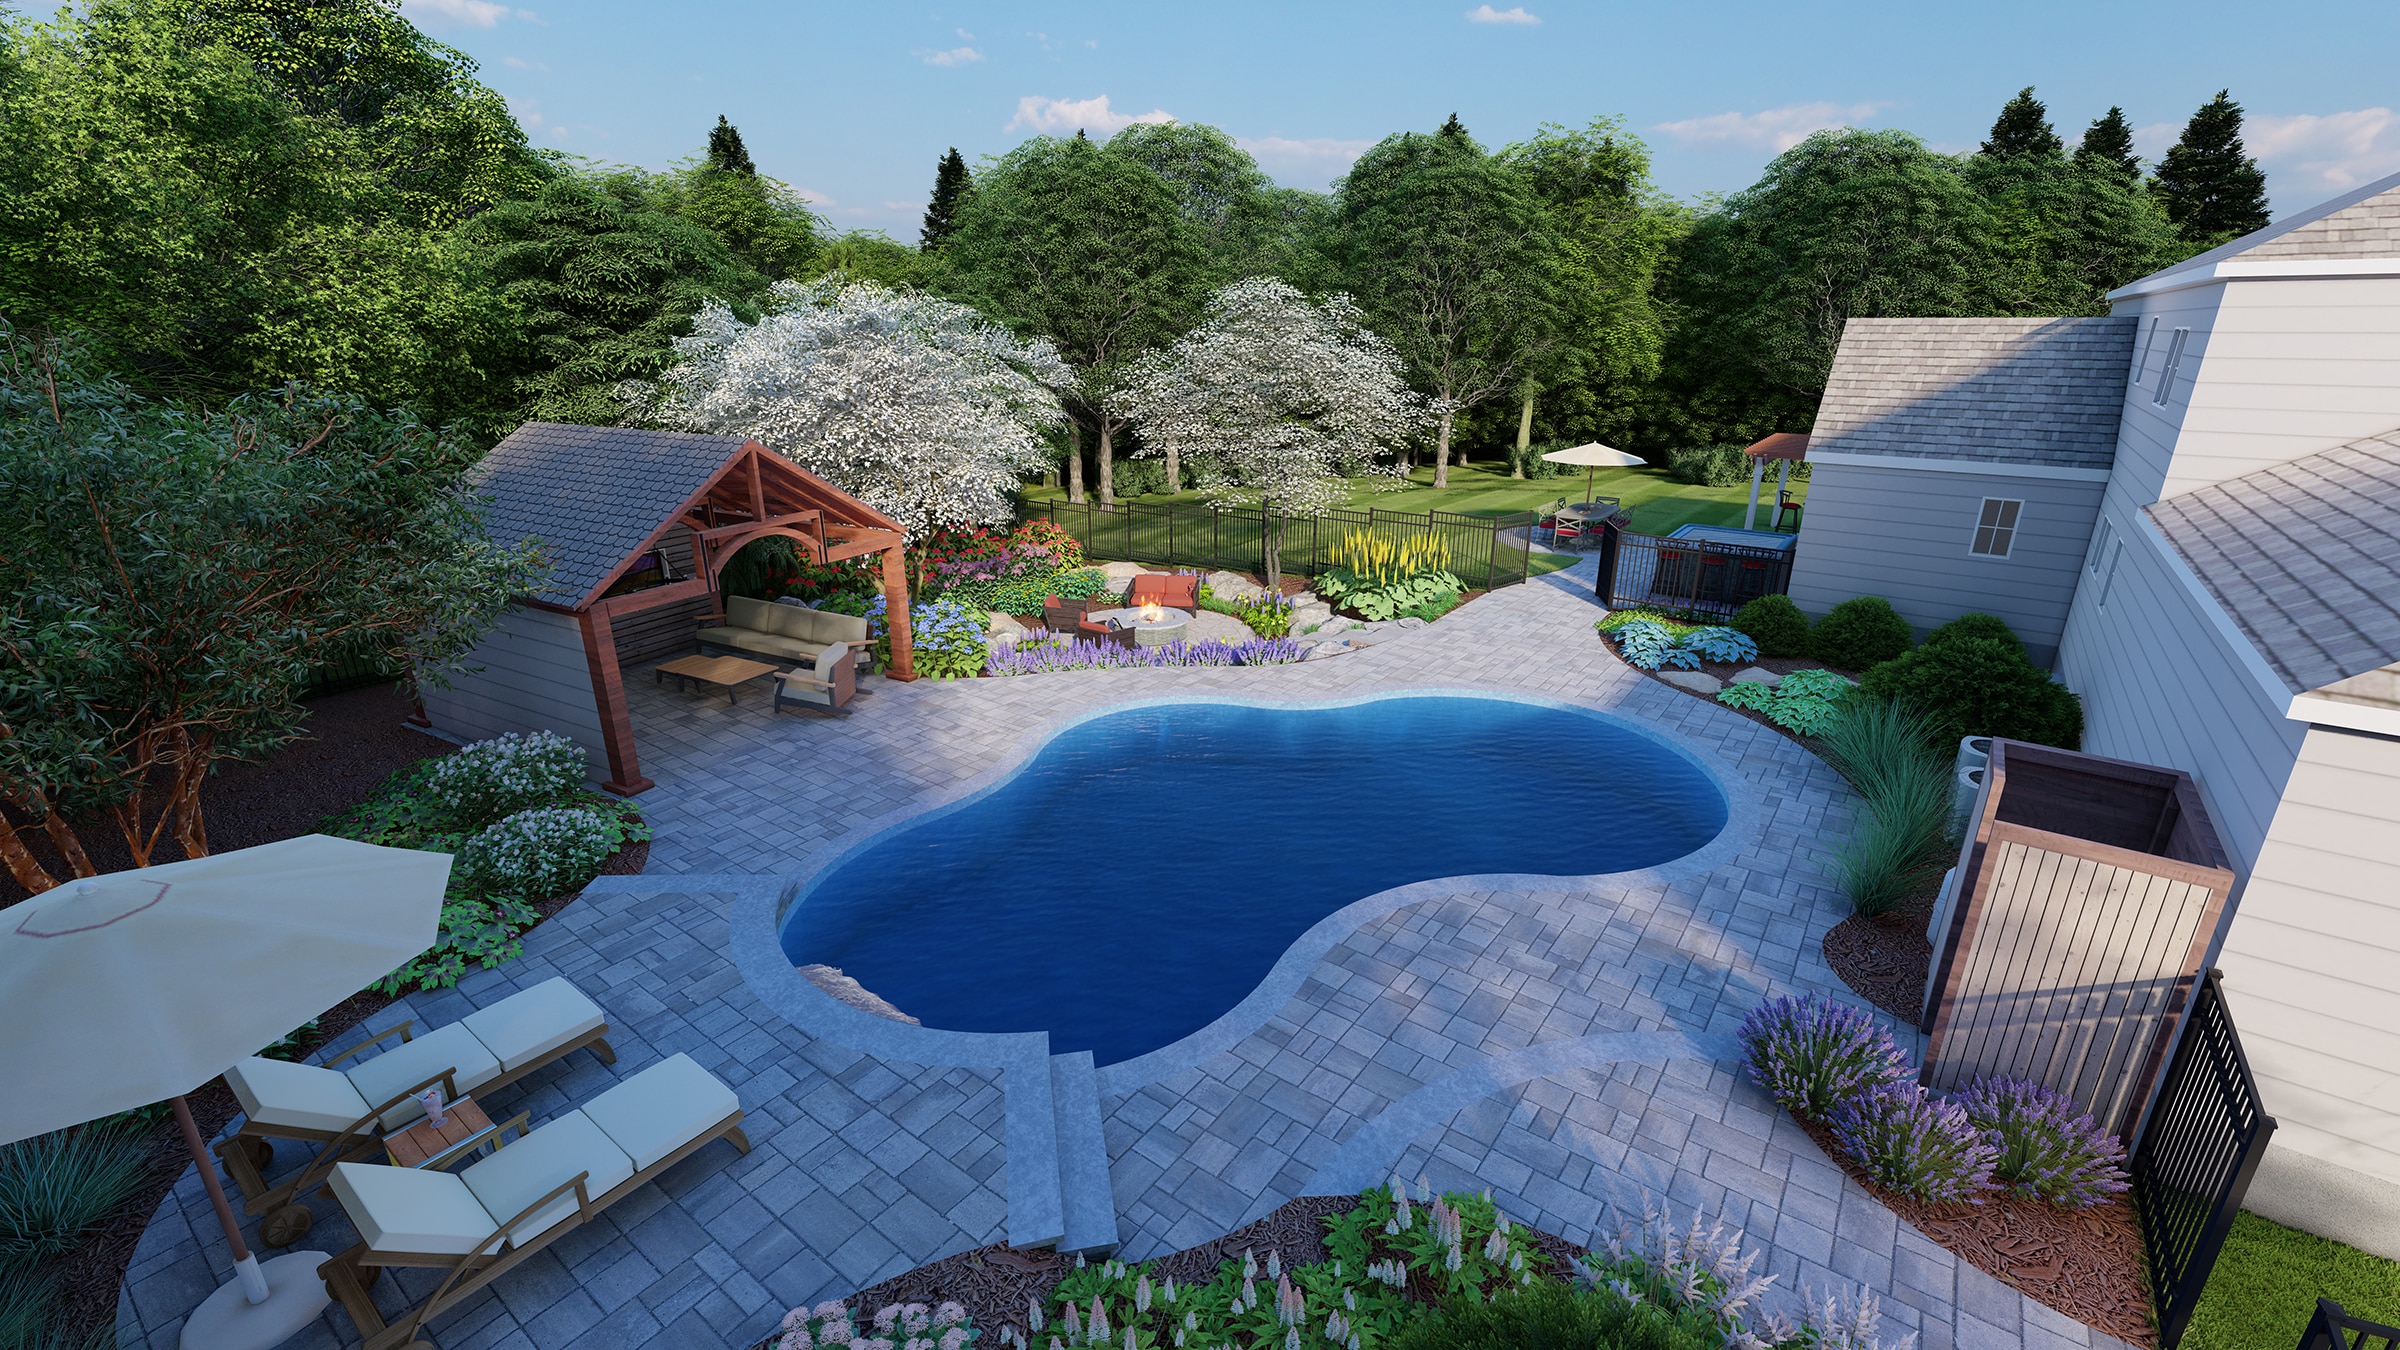 A rendered image of the proposed backyard design for our clients in Whitinsville, MA.